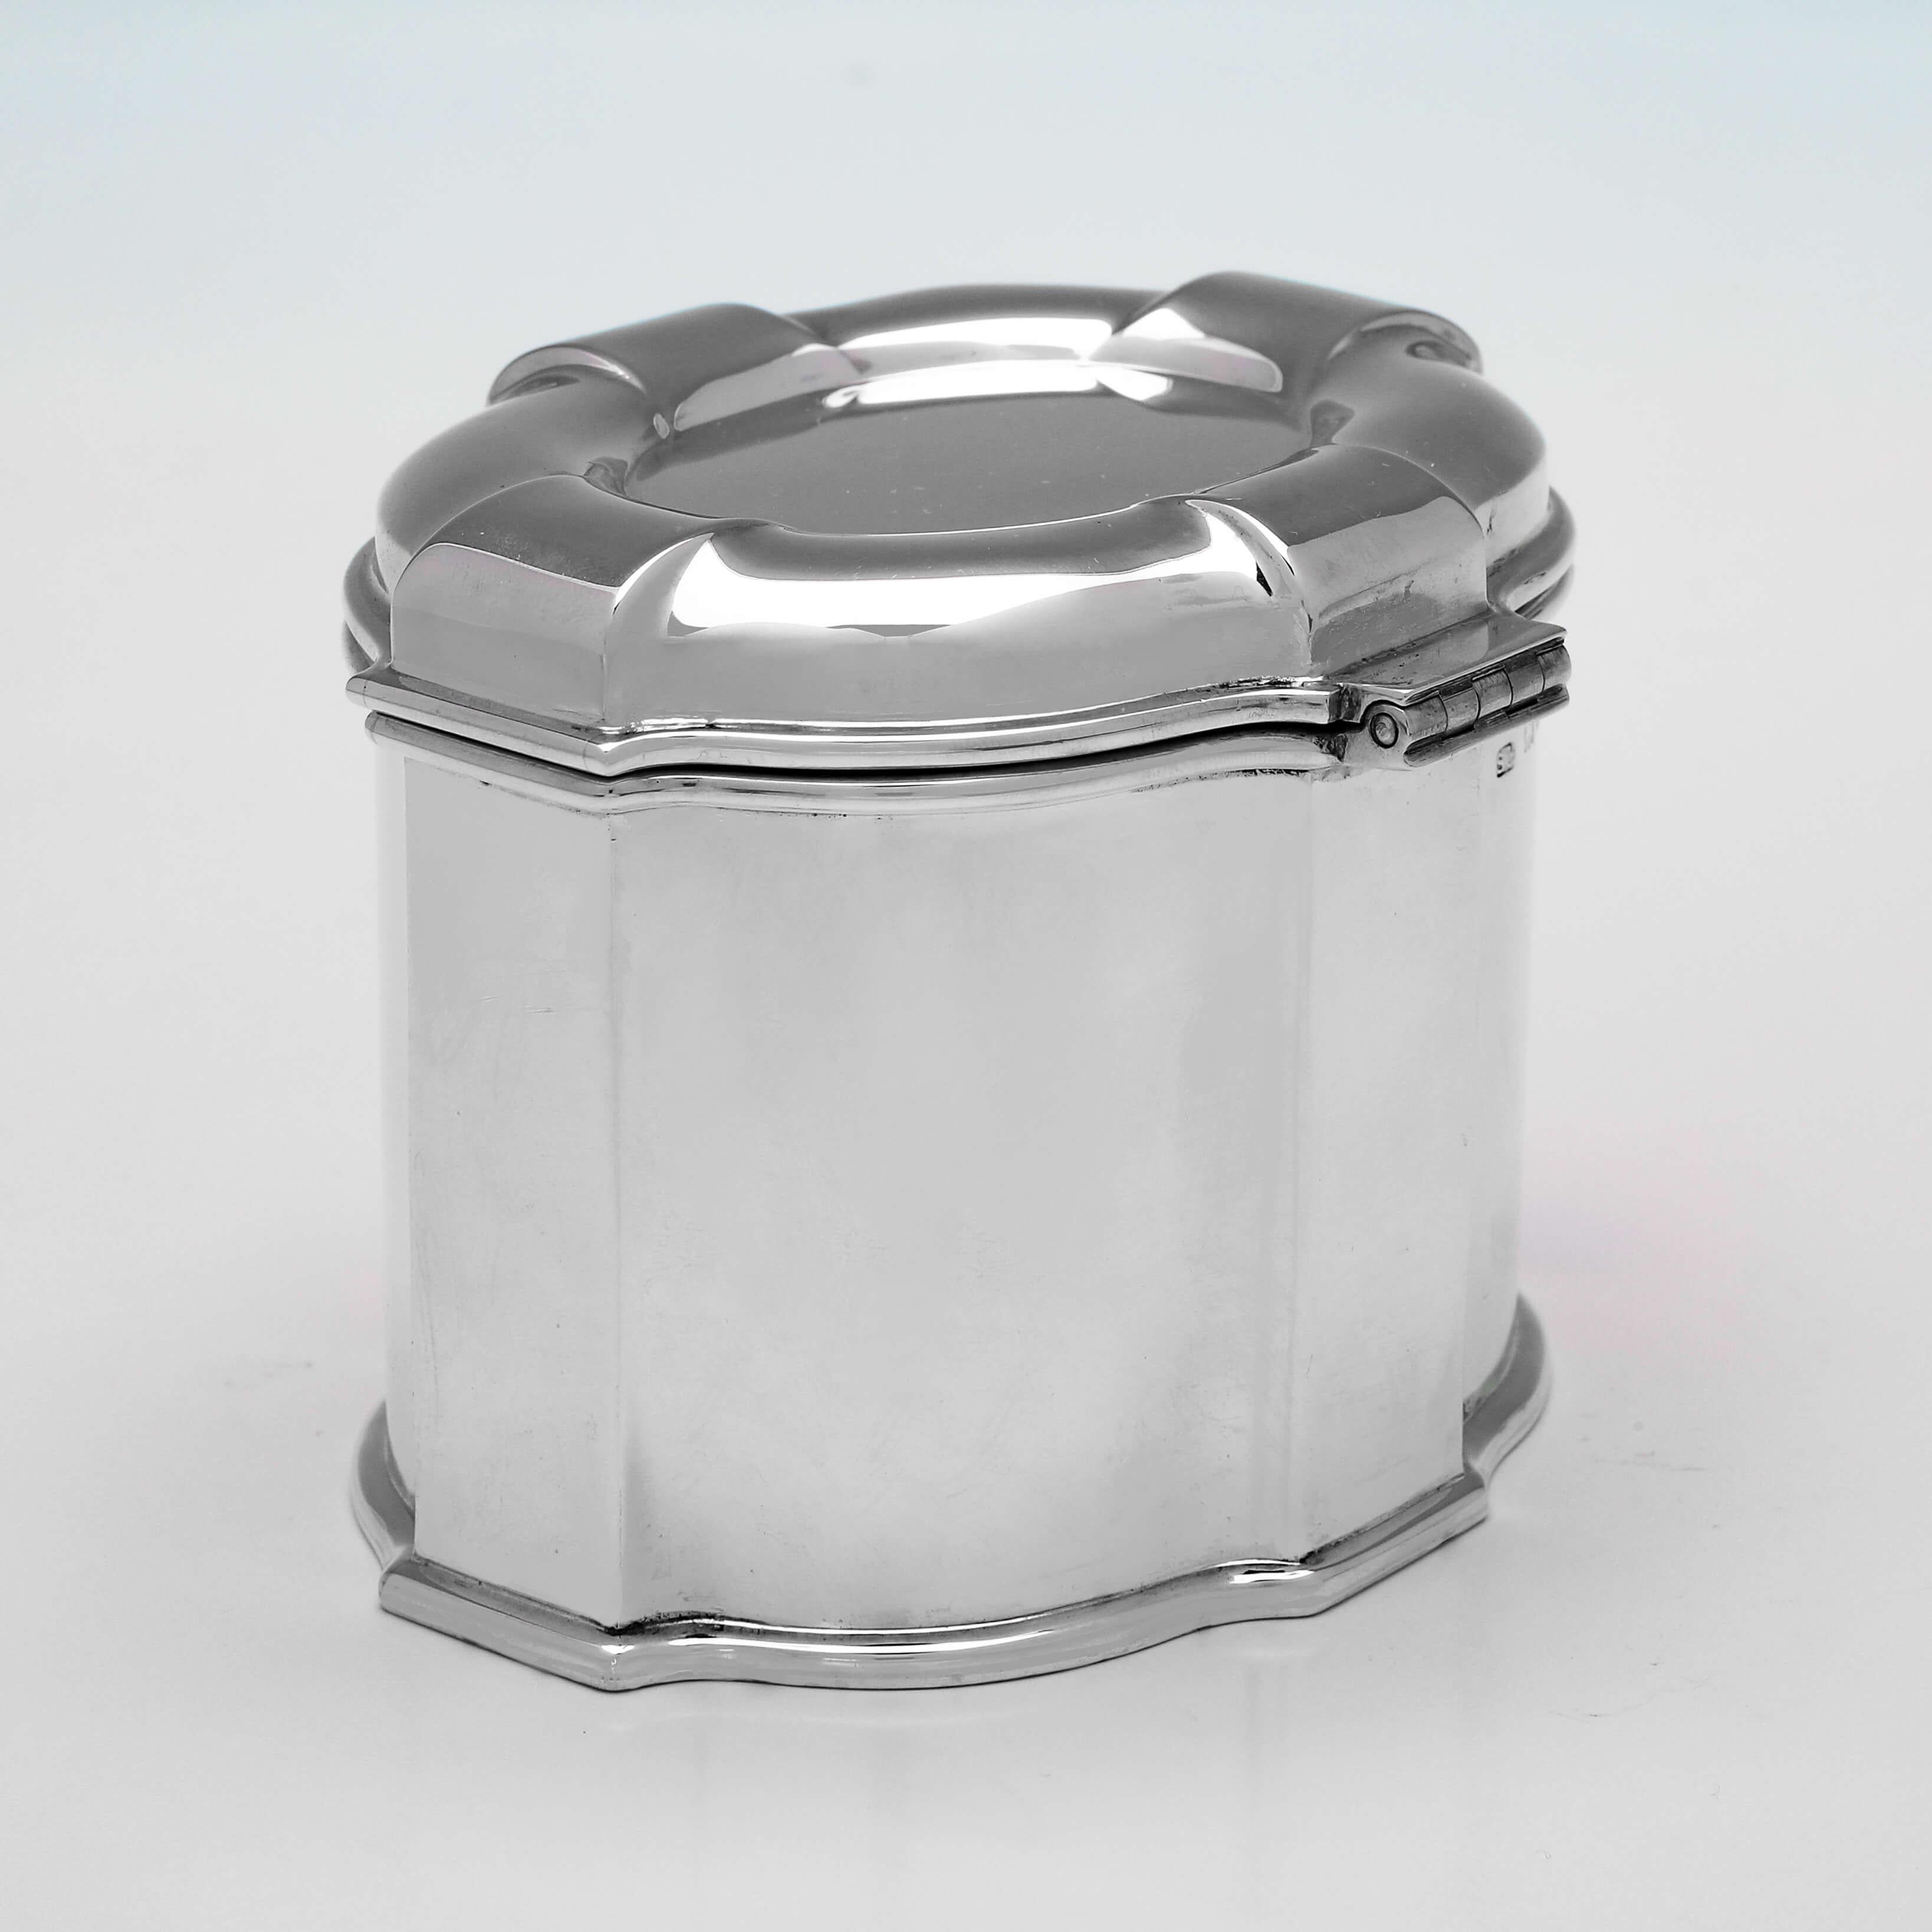 Hallmarked in London in 1926 by Garrard & Co., this handsome, Sterling Silver Tea Caddy, is oval in shape, with panelled detailing. 

The tea caddy measures 3.25